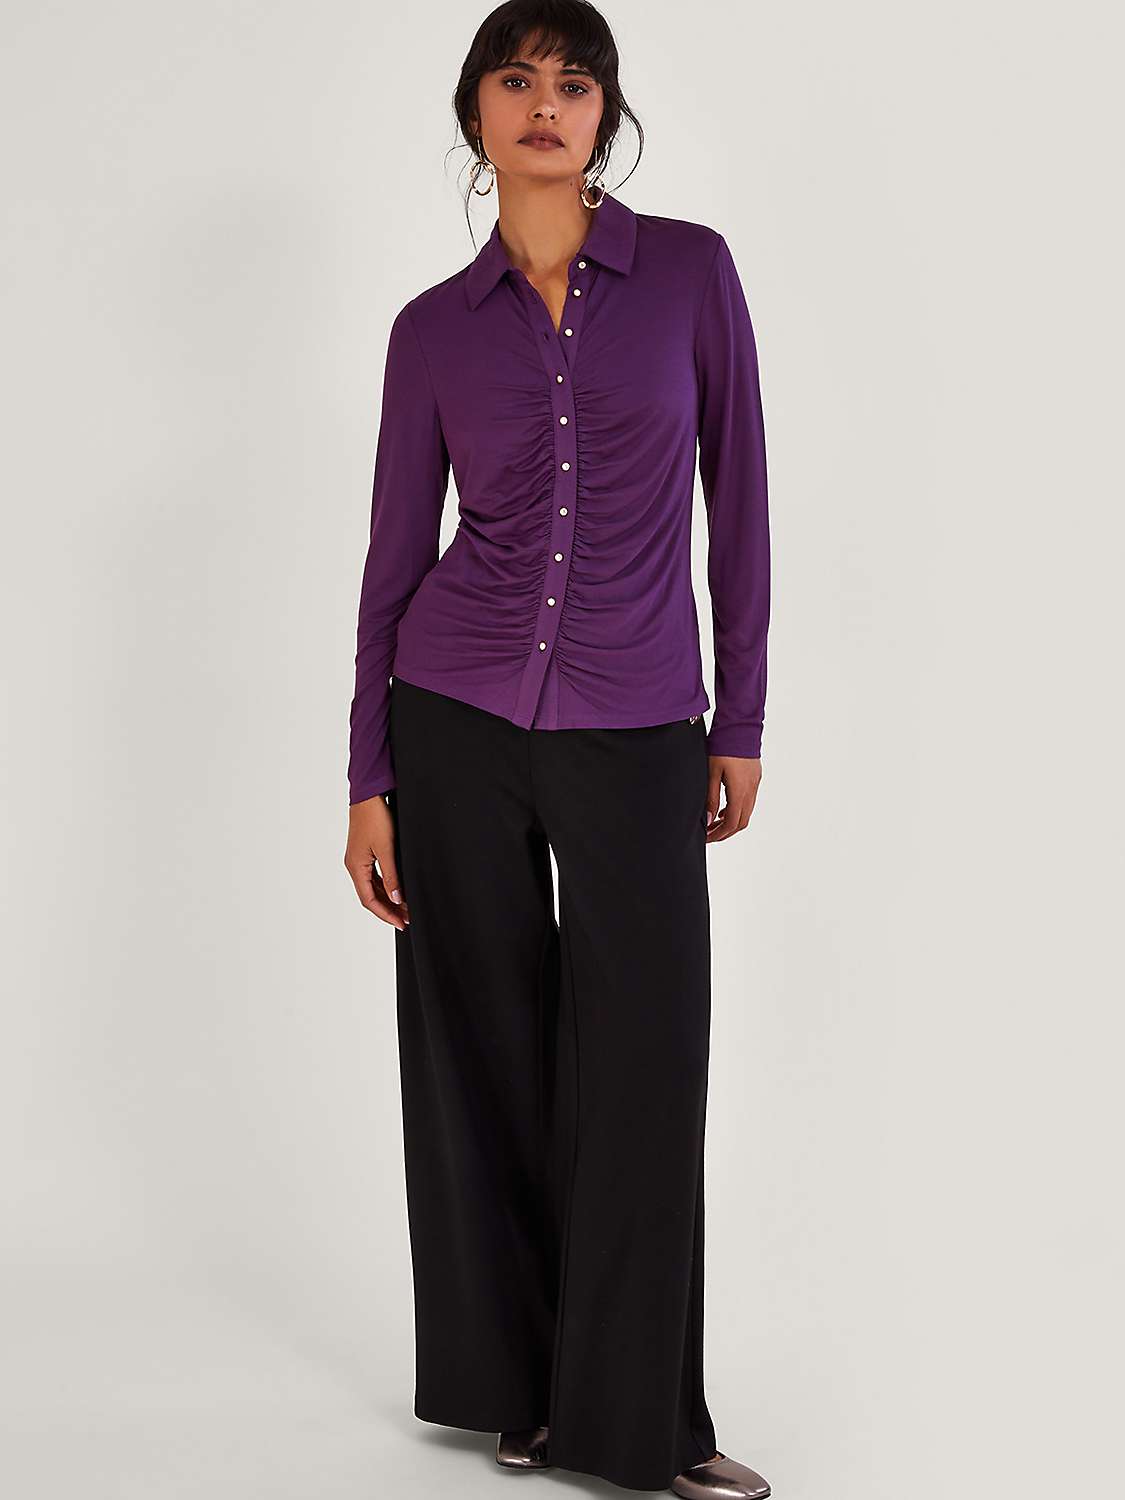 Buy Monsoon Ruched Jersey Shirt, Purple Online at johnlewis.com